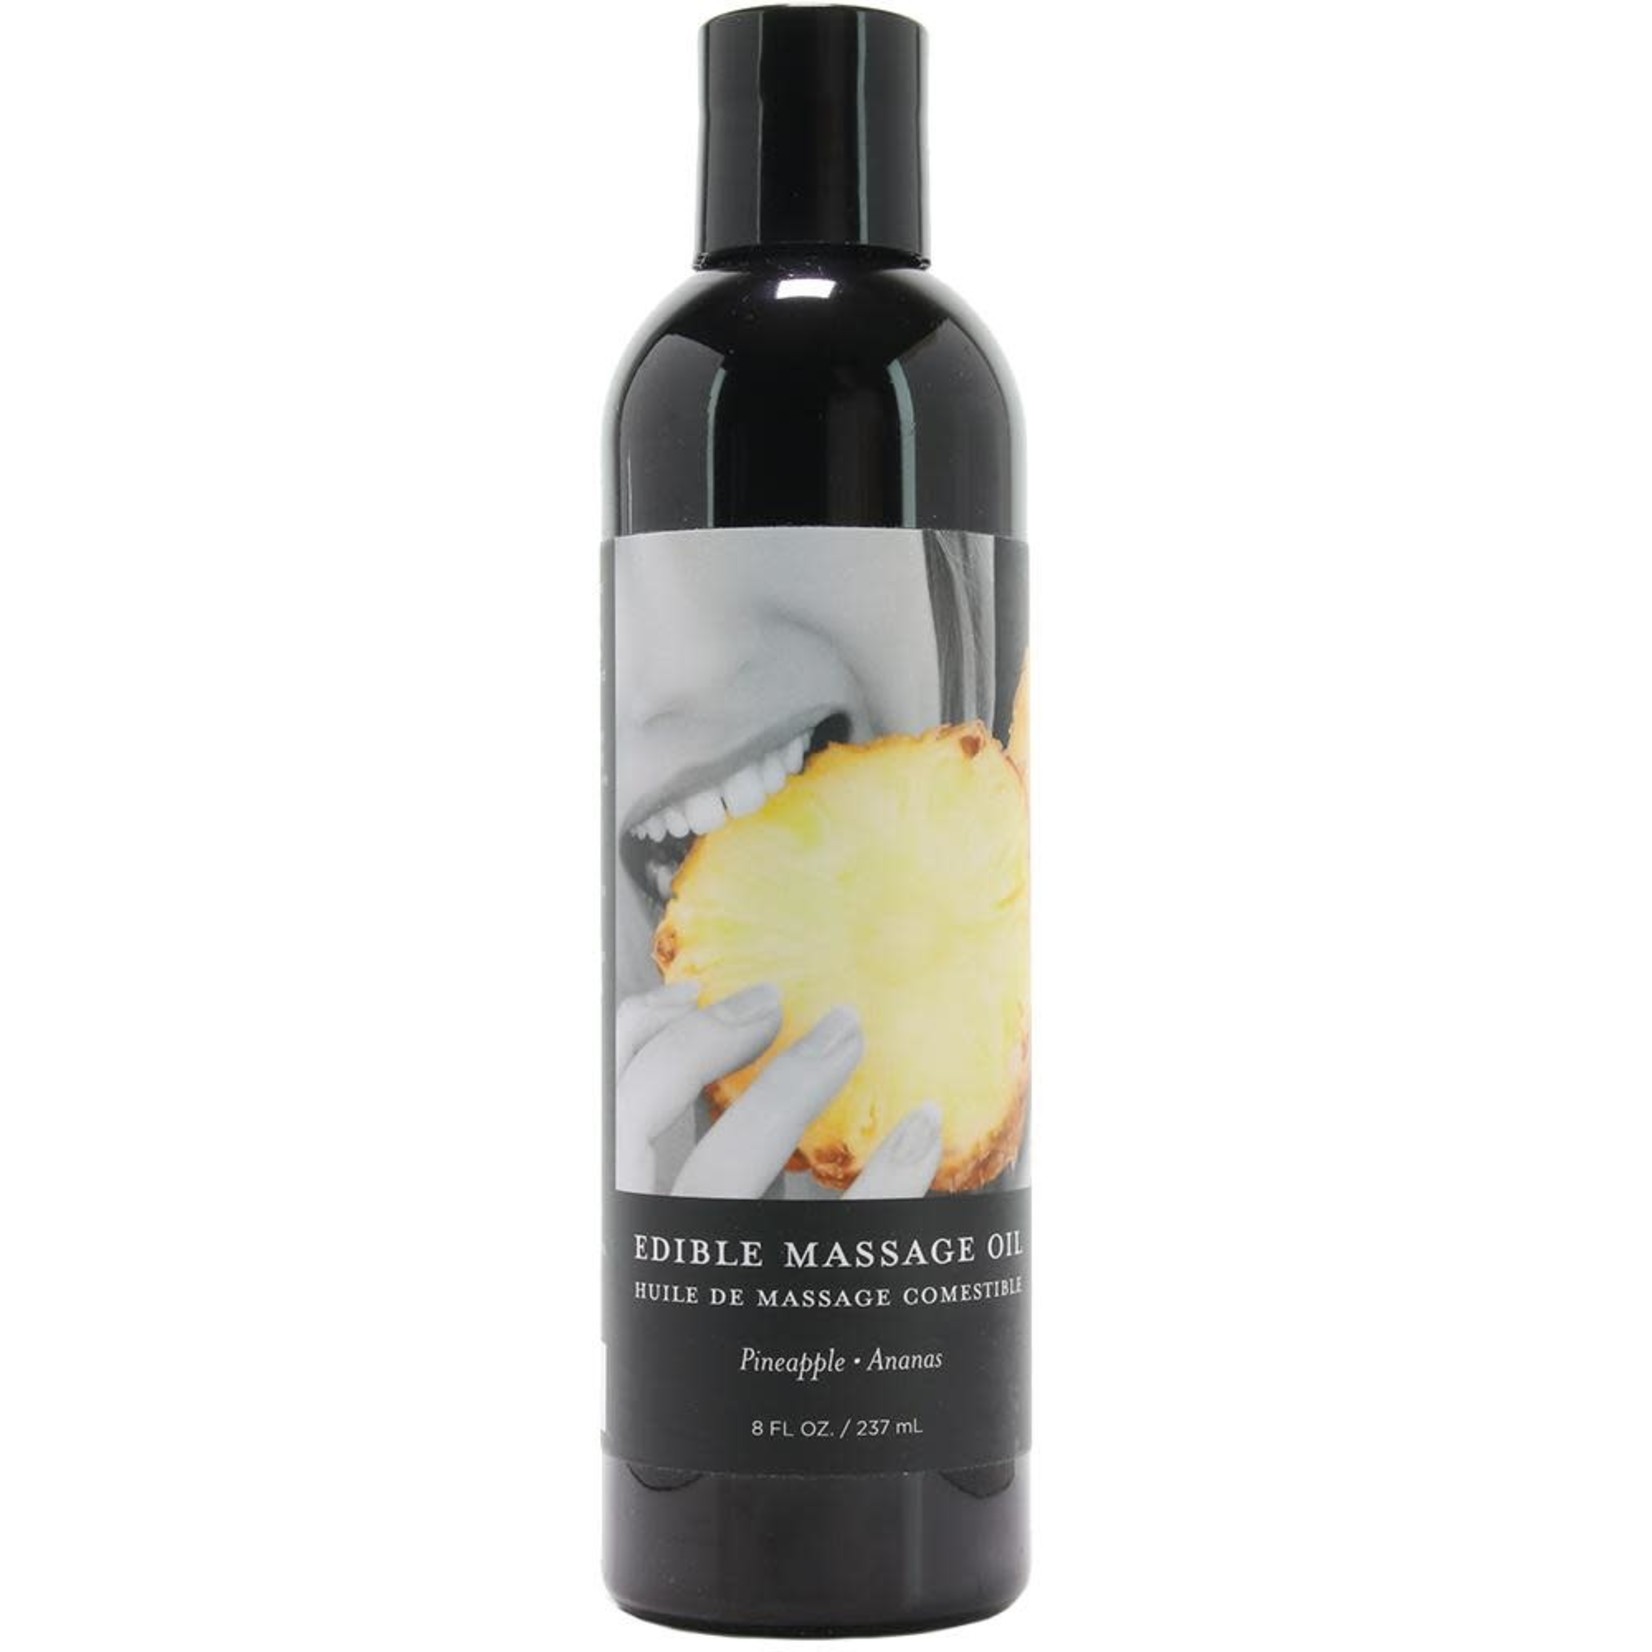 EARTHLY BODY EARTHLY BODIES - EDIBLE MASSAGE OIL - PINEAPPLE  8oz